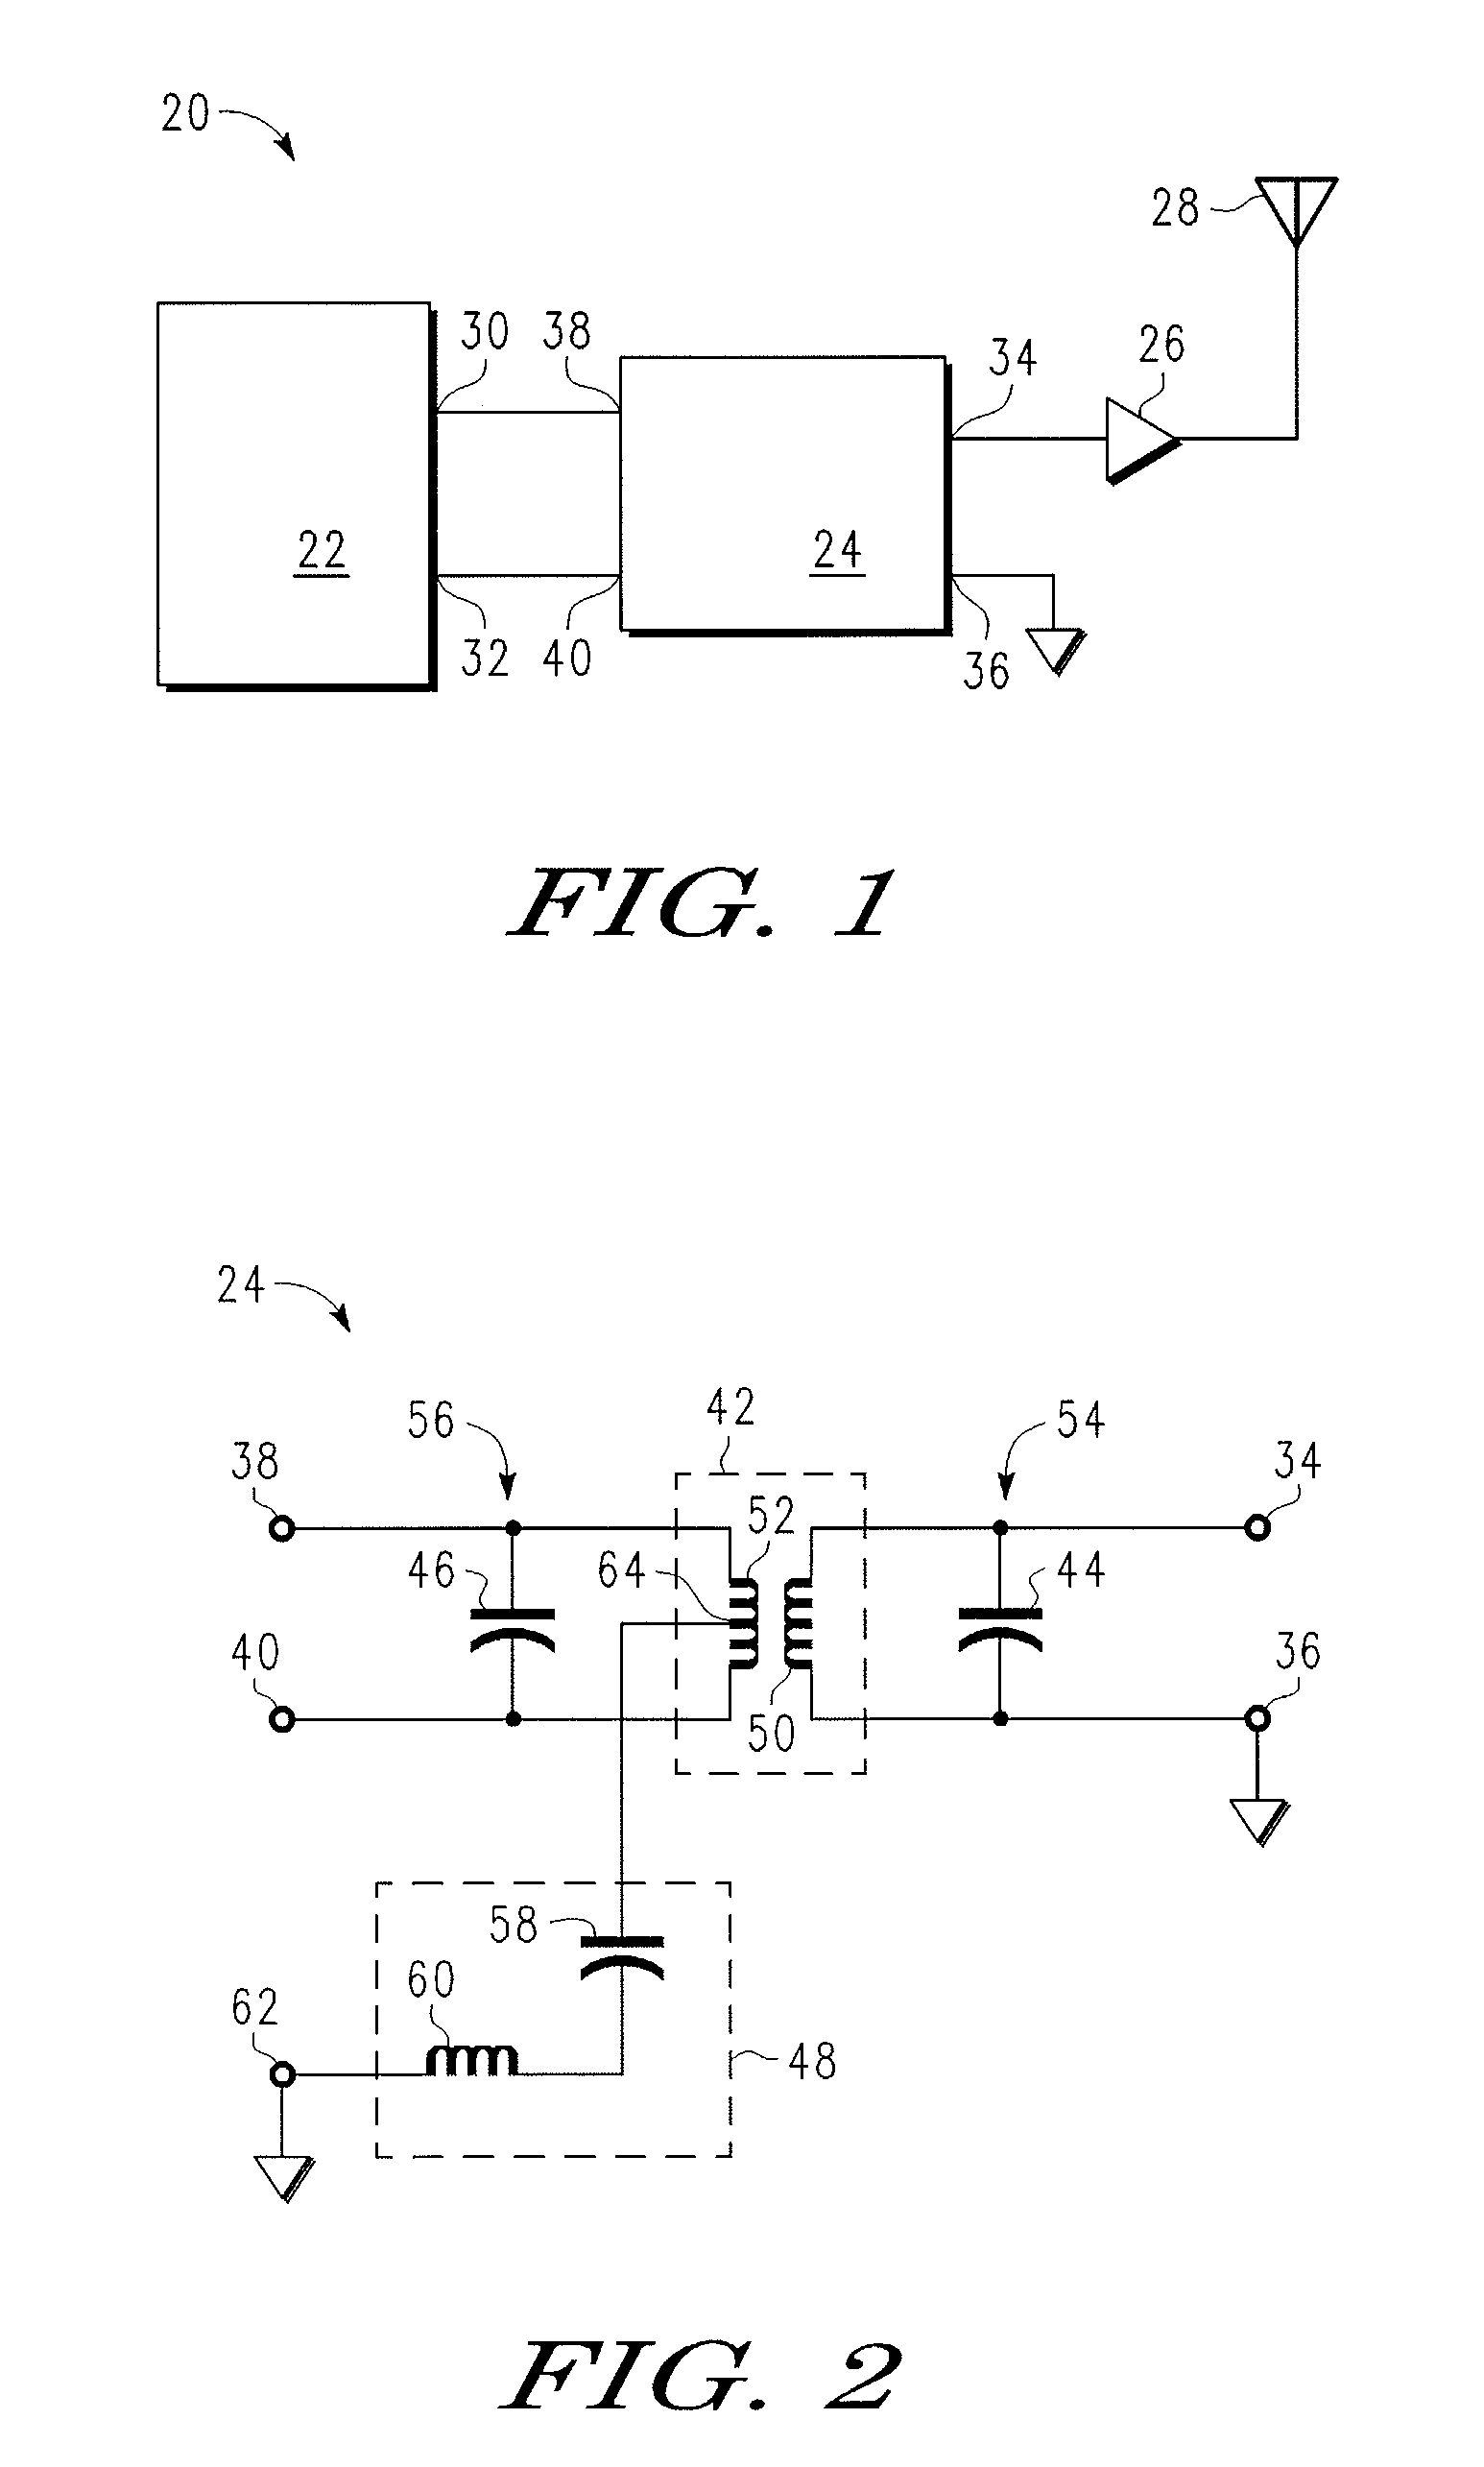 Balun transformer with improved harmonic suppression